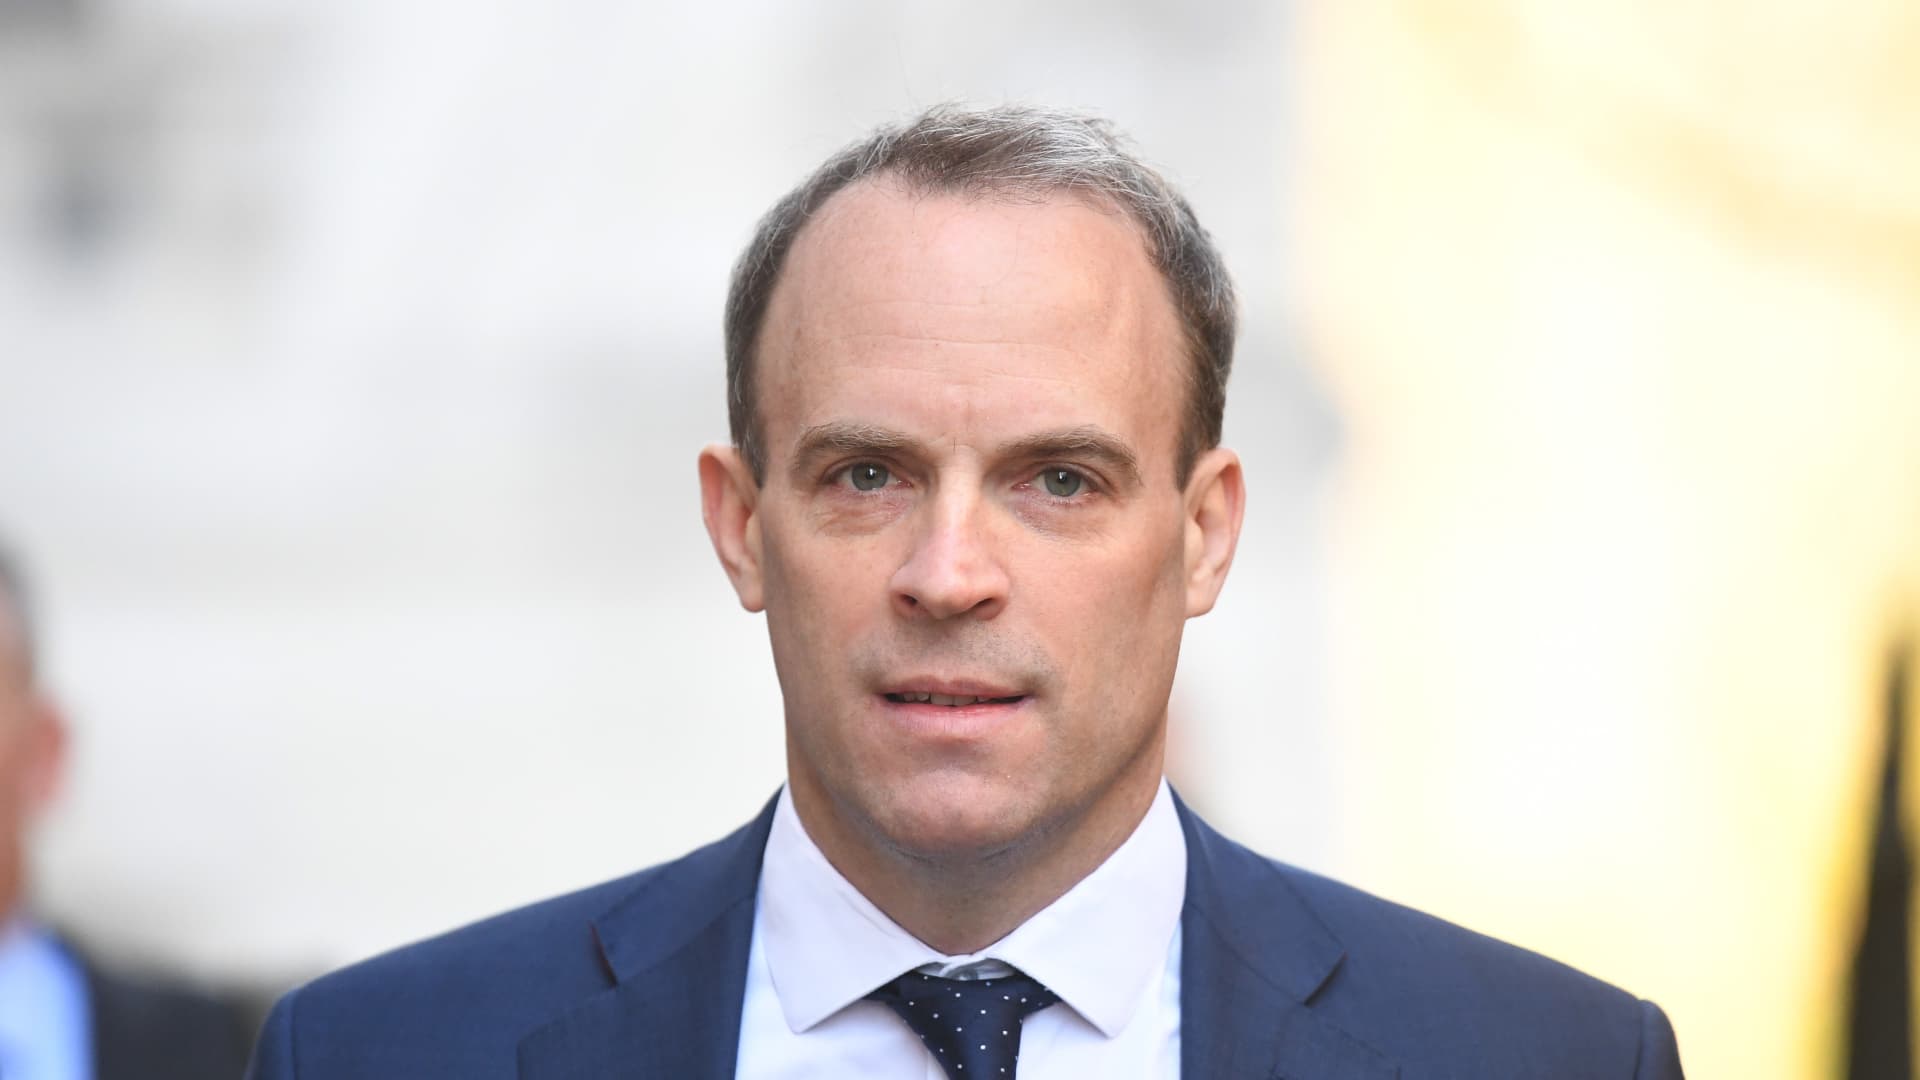 Foreign Minister Dominic Raab is pictured in Downing Street on March 25, 2020 in London, England.